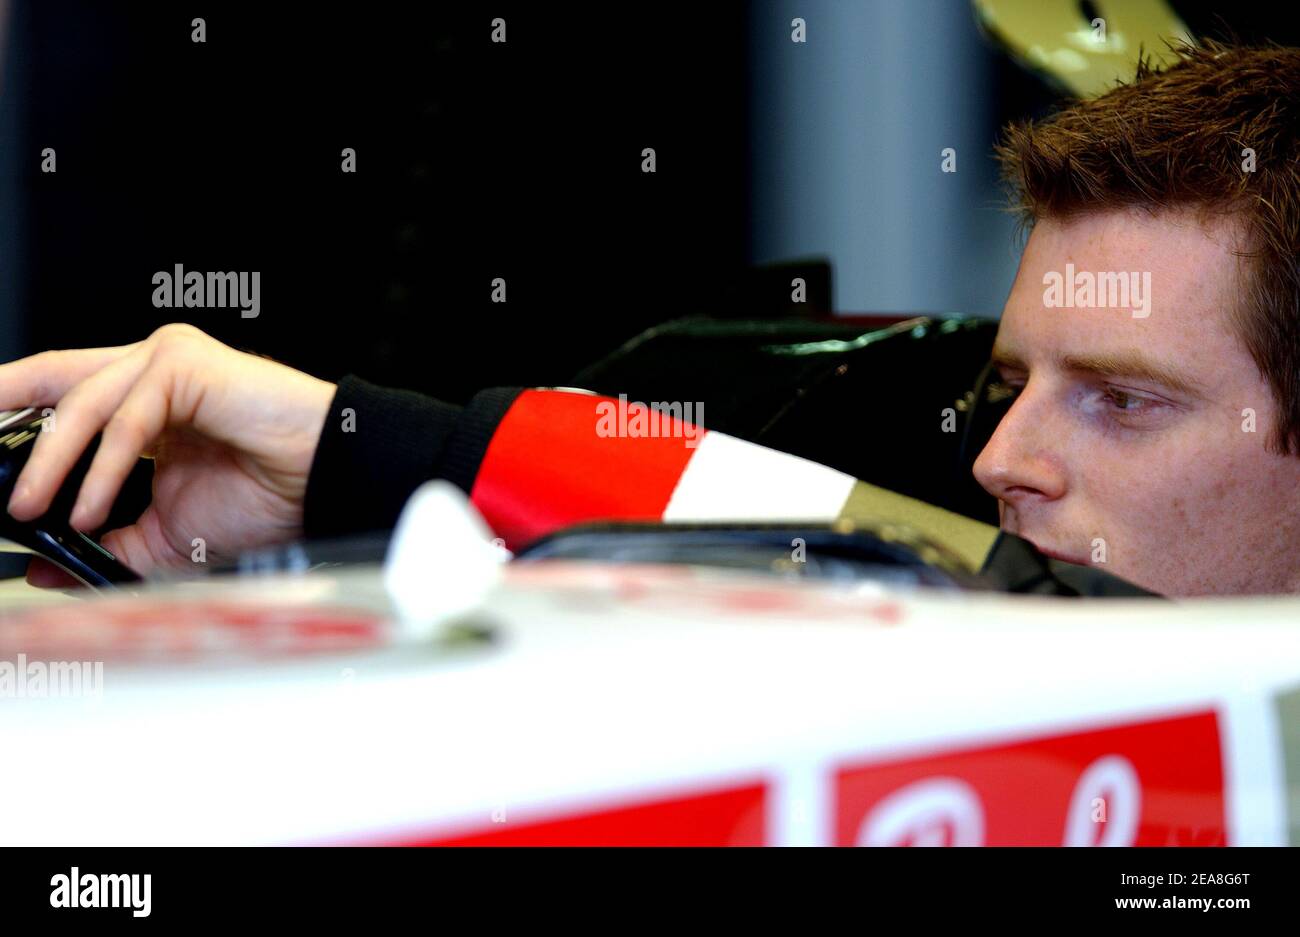 U K Formula 1 driver Anthony Davidson (team bar honda) replaces Takuma Sato who has been taken ill (fever) and will not take place for the race Sunday afternoon during the G.P of the Sepang circuit, Malaysia, on March 18, 2005. Photo by Thierry Gromik/ABACA Stock Photo